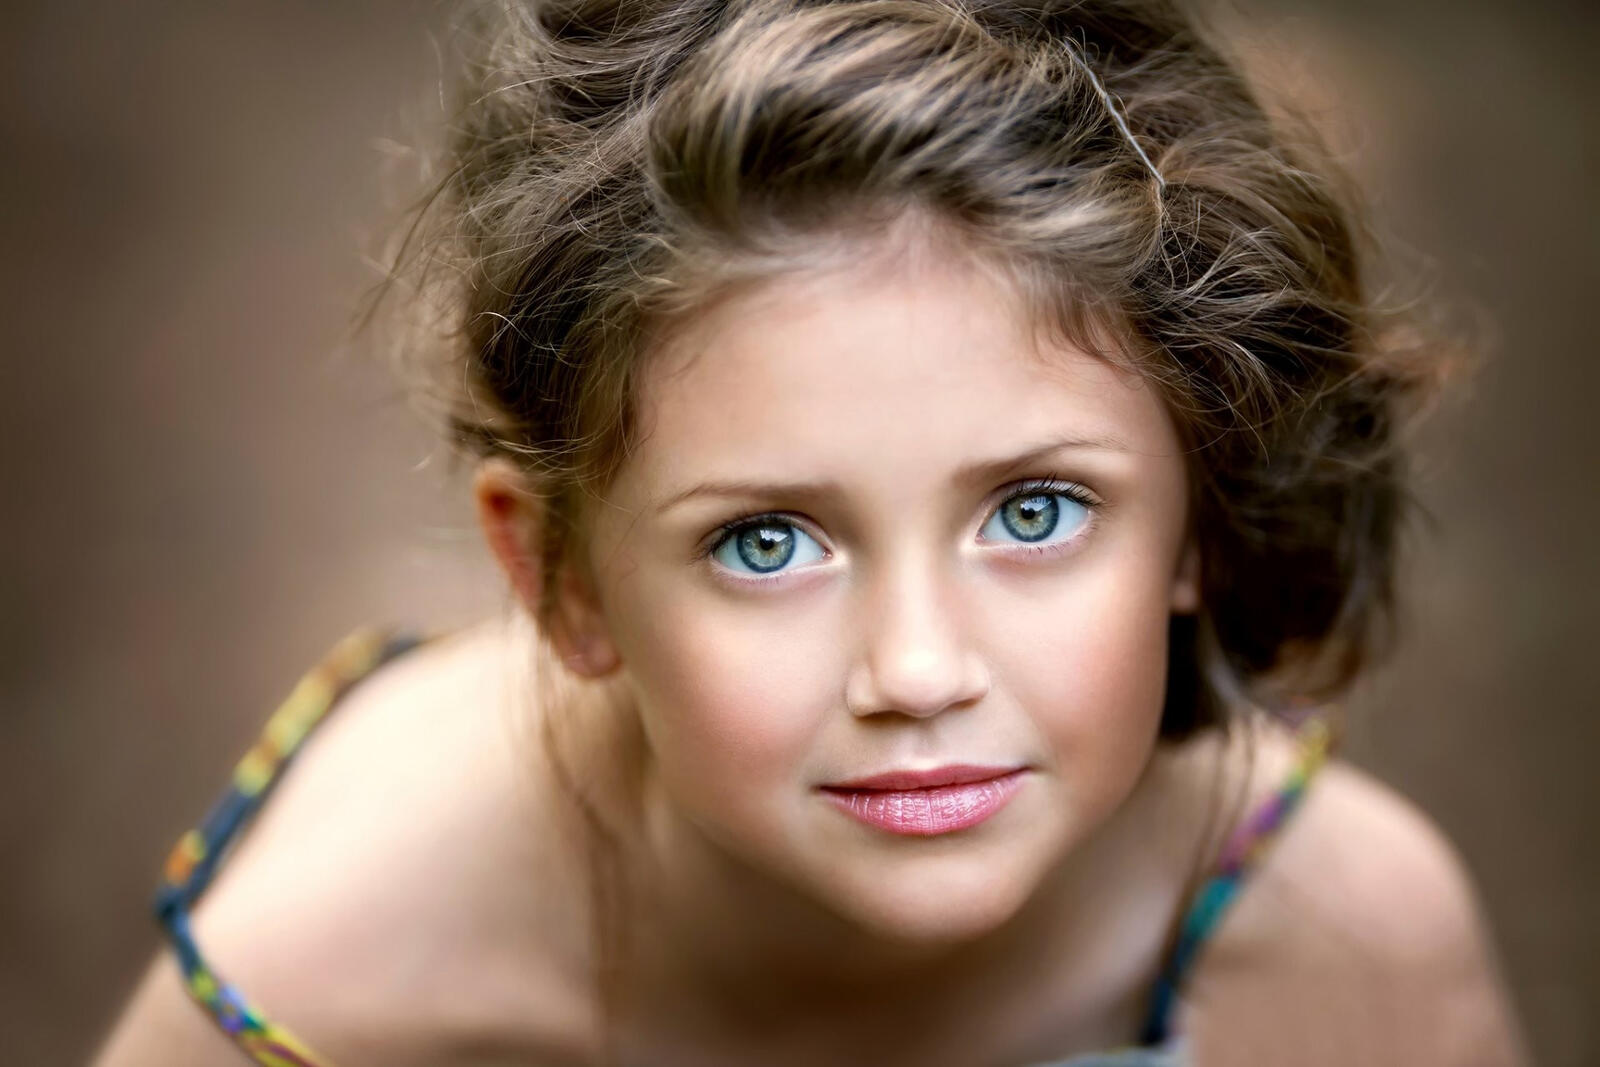 Free photo A young girl with beautiful eyes